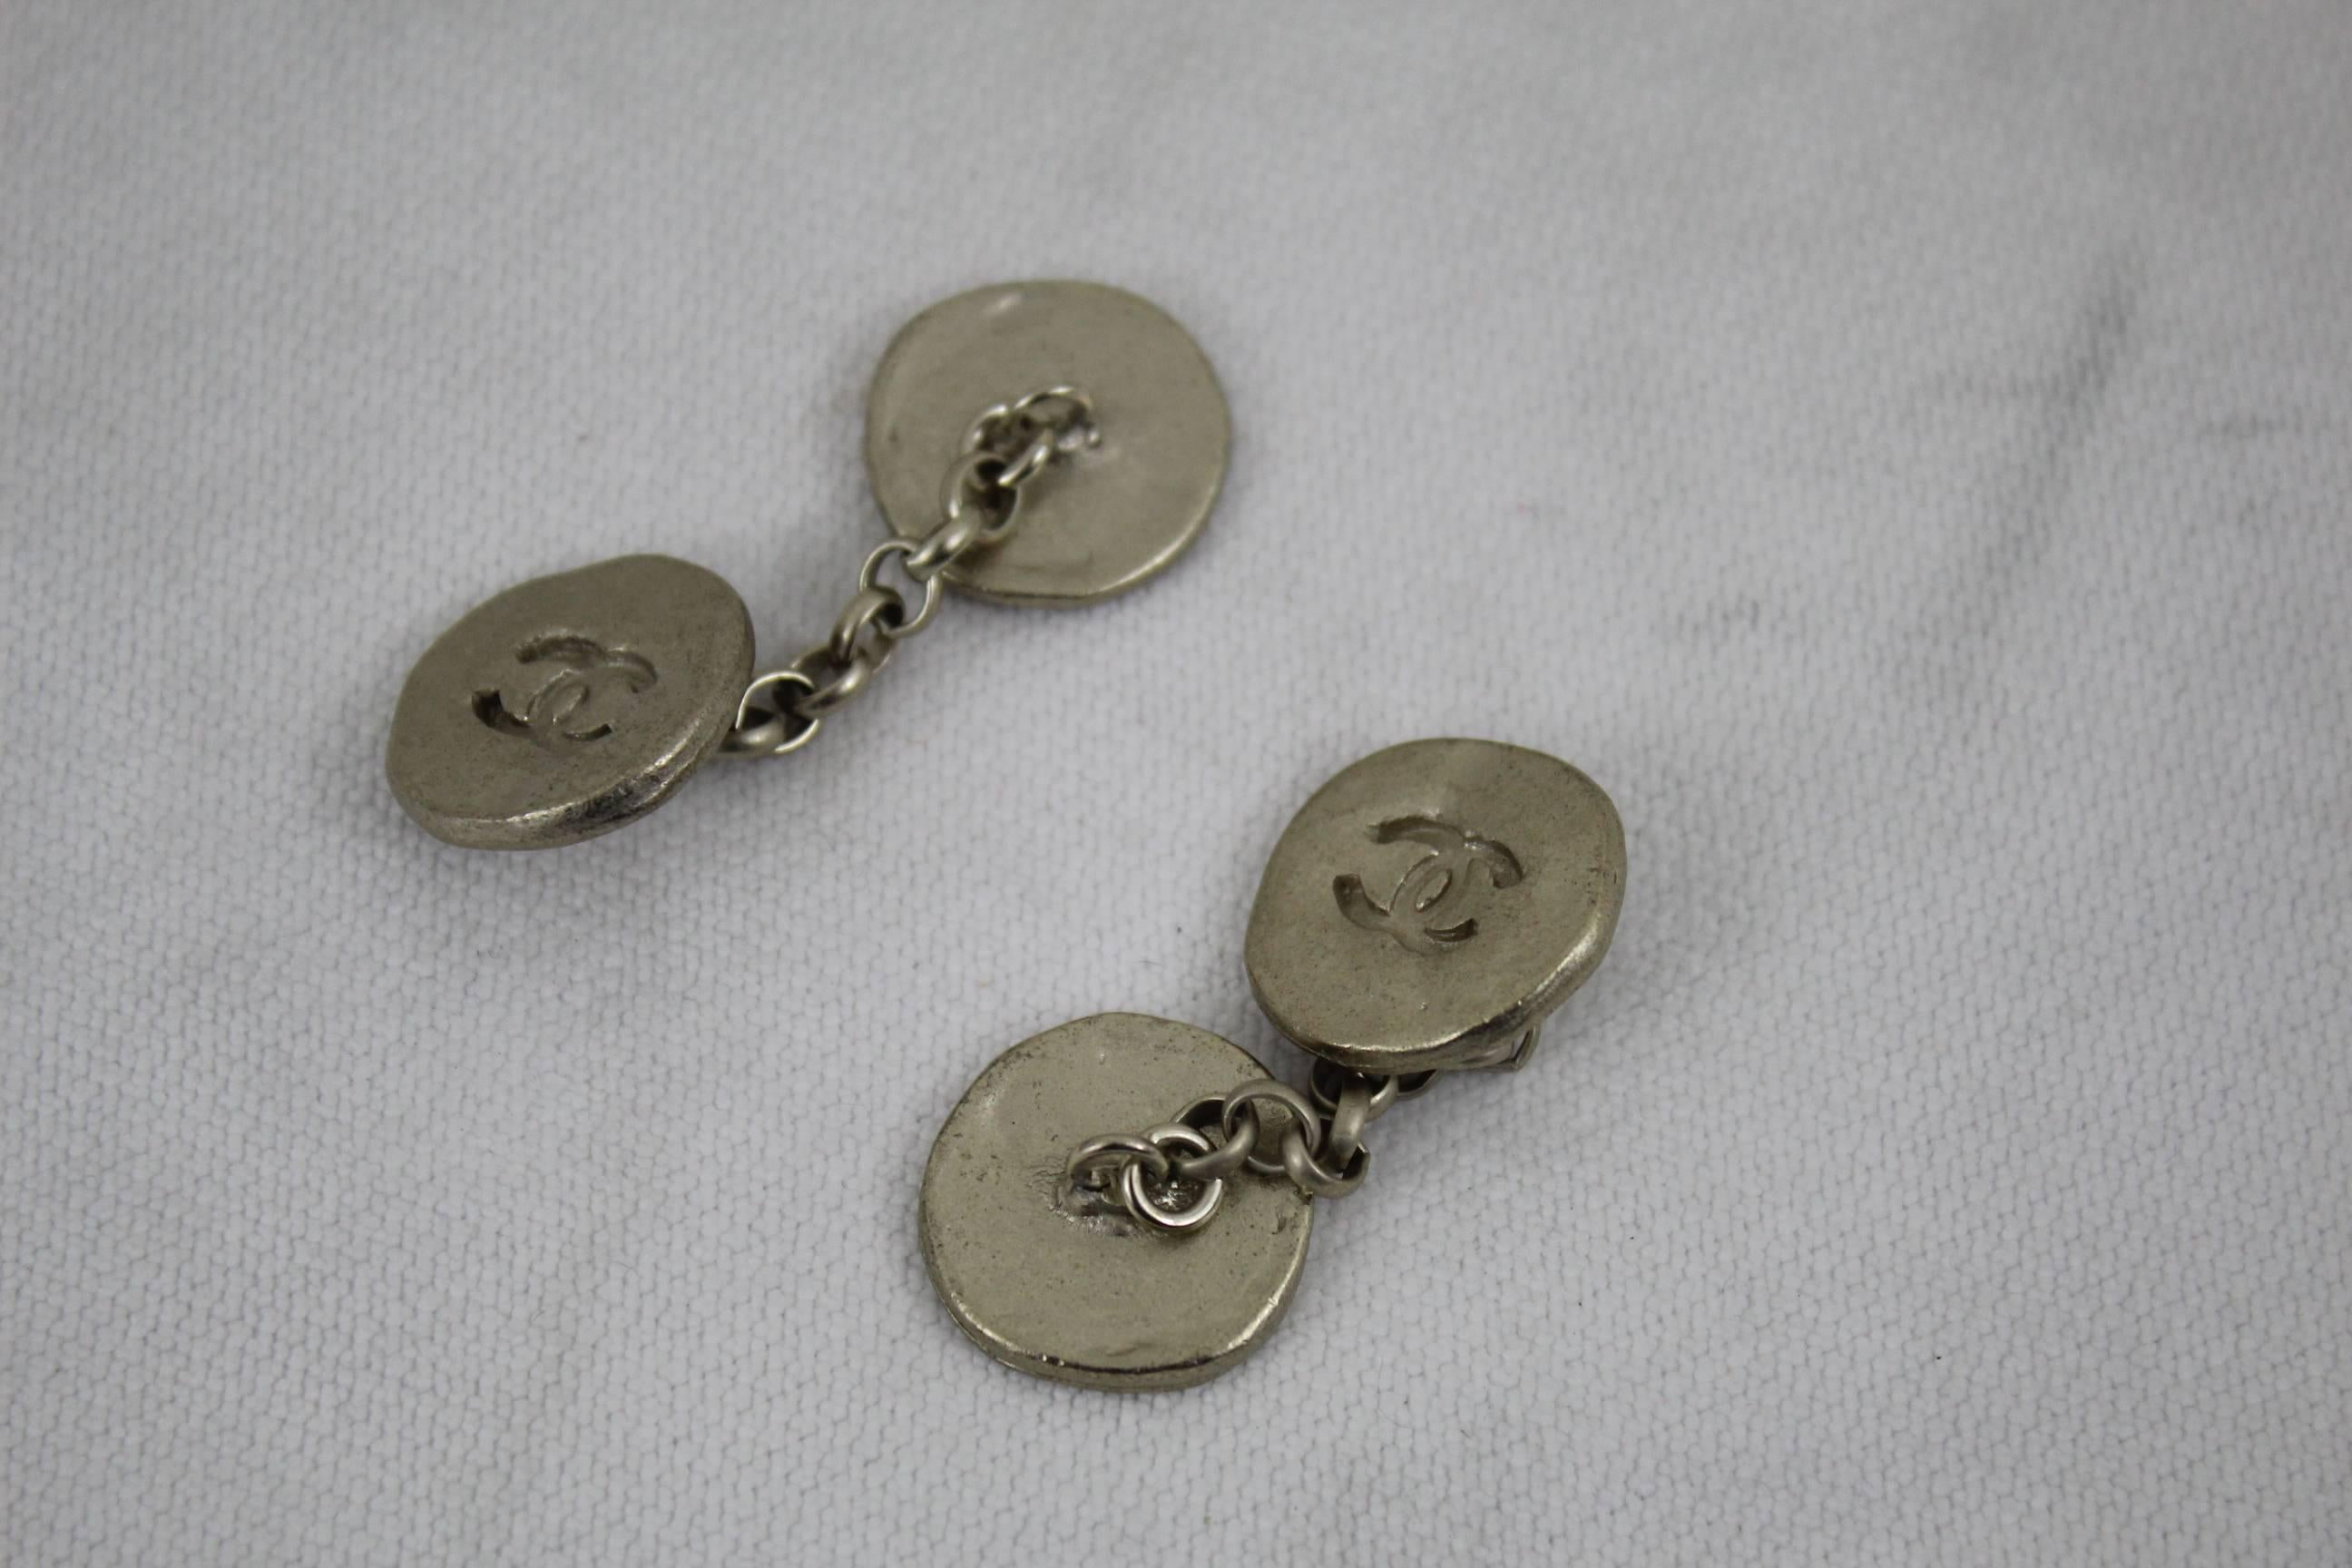 Pair of cufflinks from Chanel coming form an haute Couture Suit.
These are from 1992

long chain for a double cuff.

Good condition.

not signed in the back but 100% authentic Chanel